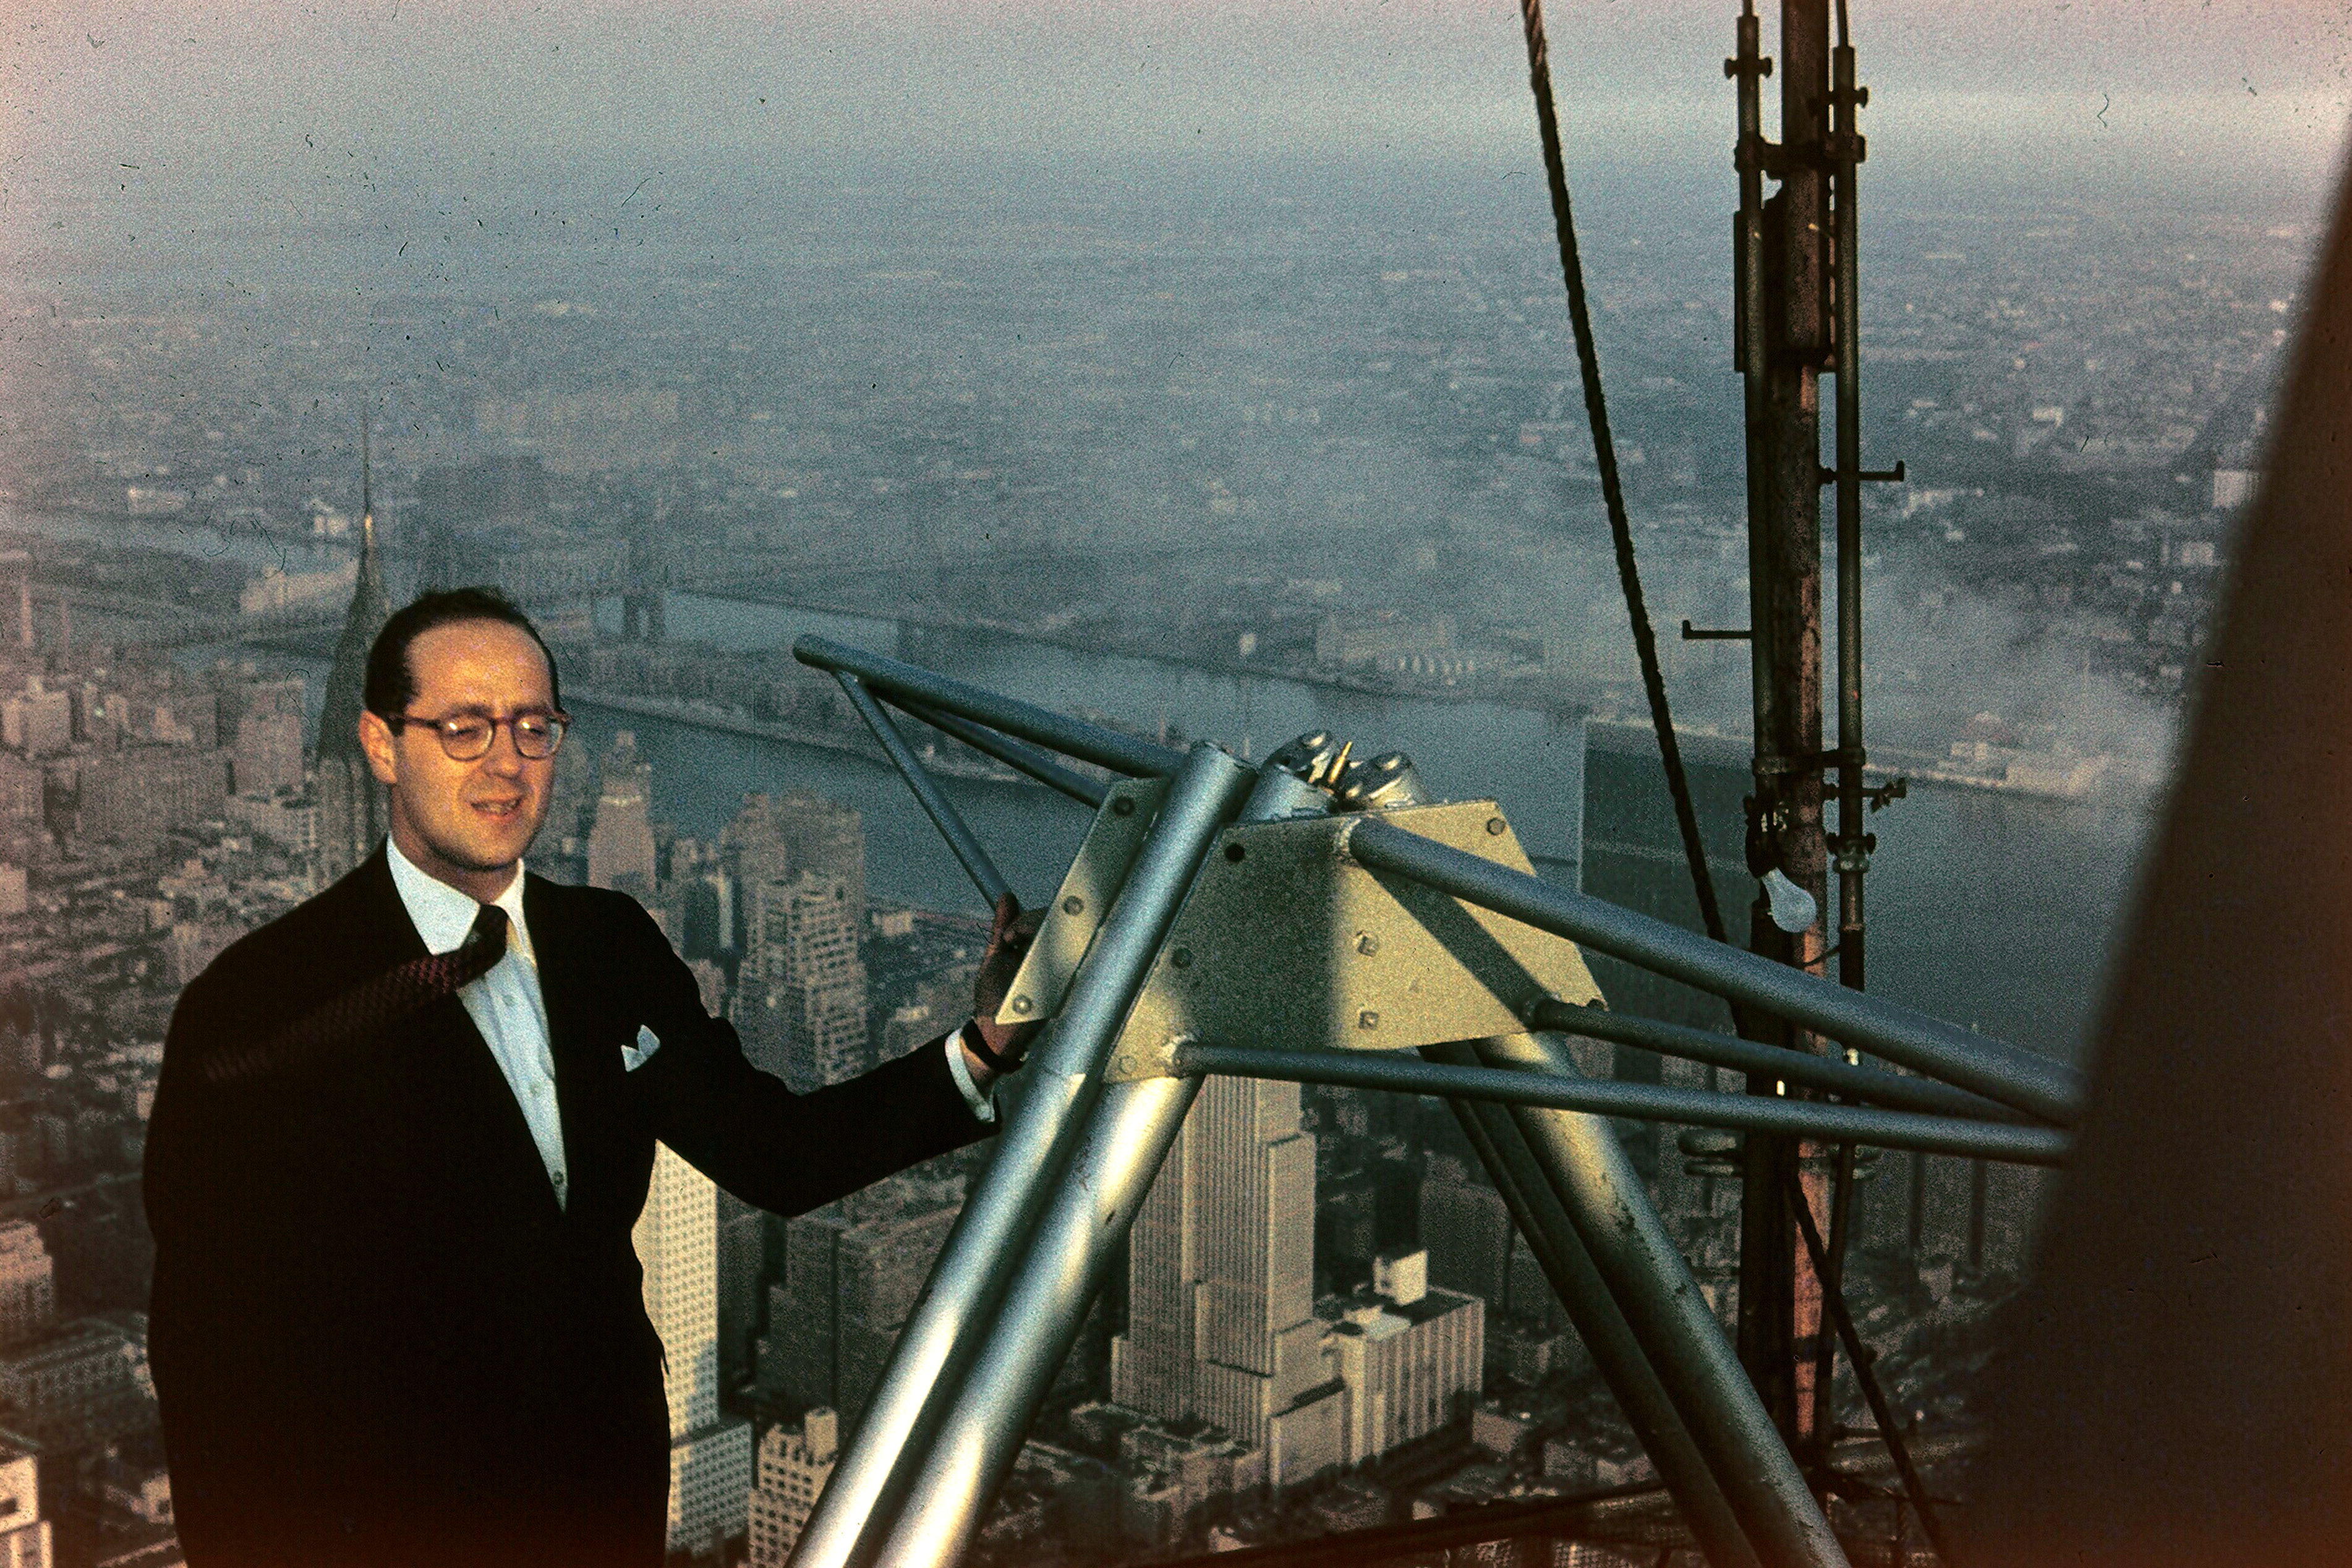 Joe Stern ’44 (ENG) atop the Empire State Building, standing next to the transmitter he helped design. Joe credited UConn with providing him the tools to have a successful career in telecommunications. (Photo courtesy of Linda Jo Stern '77 (CAHNR))